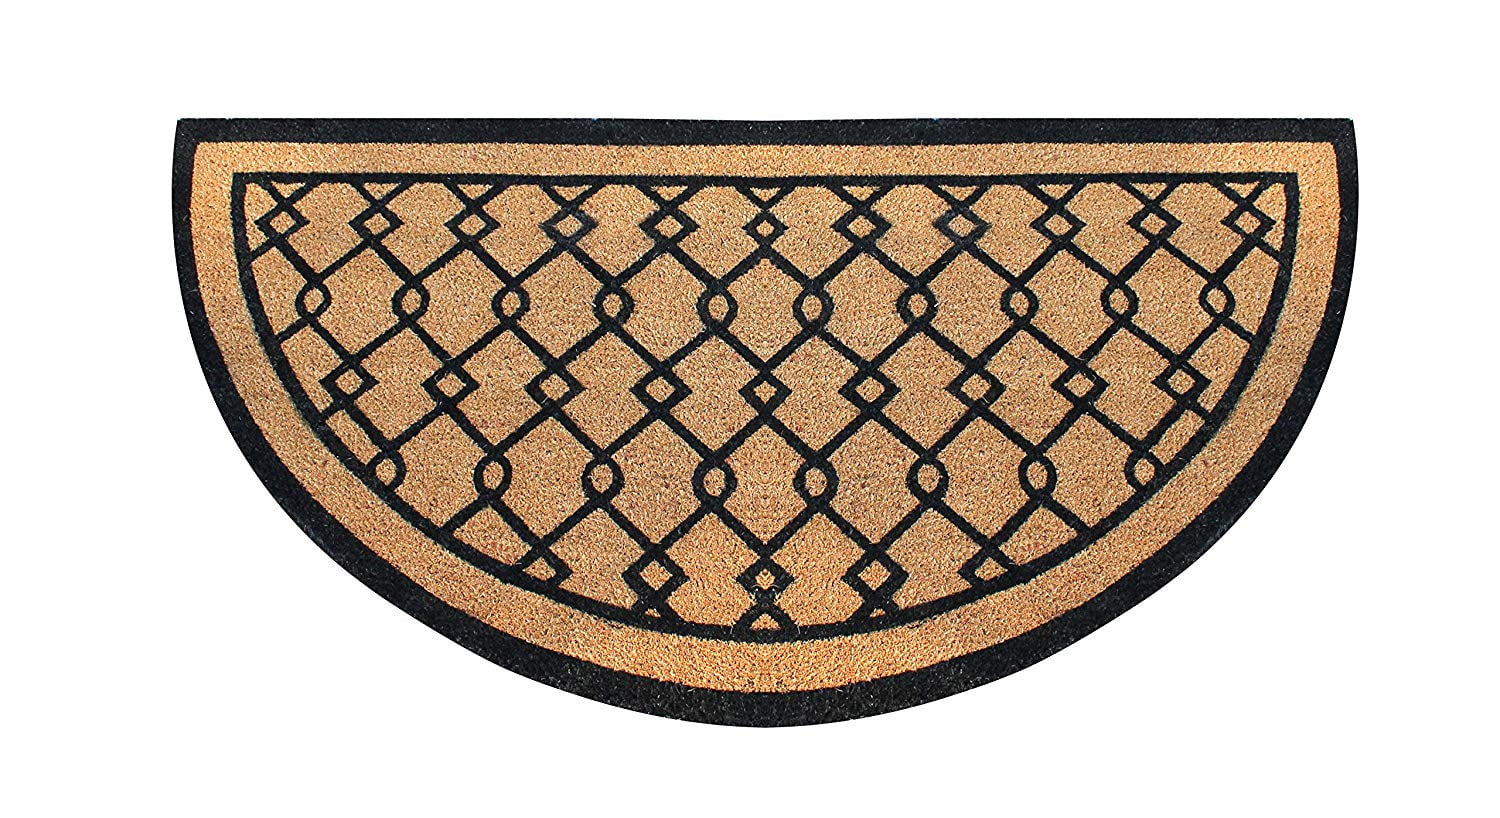 C A1 Home Collections A1HC407C Hand Crafted Anti Shred Treated Entry Monogrammed Doormat 30 X 48